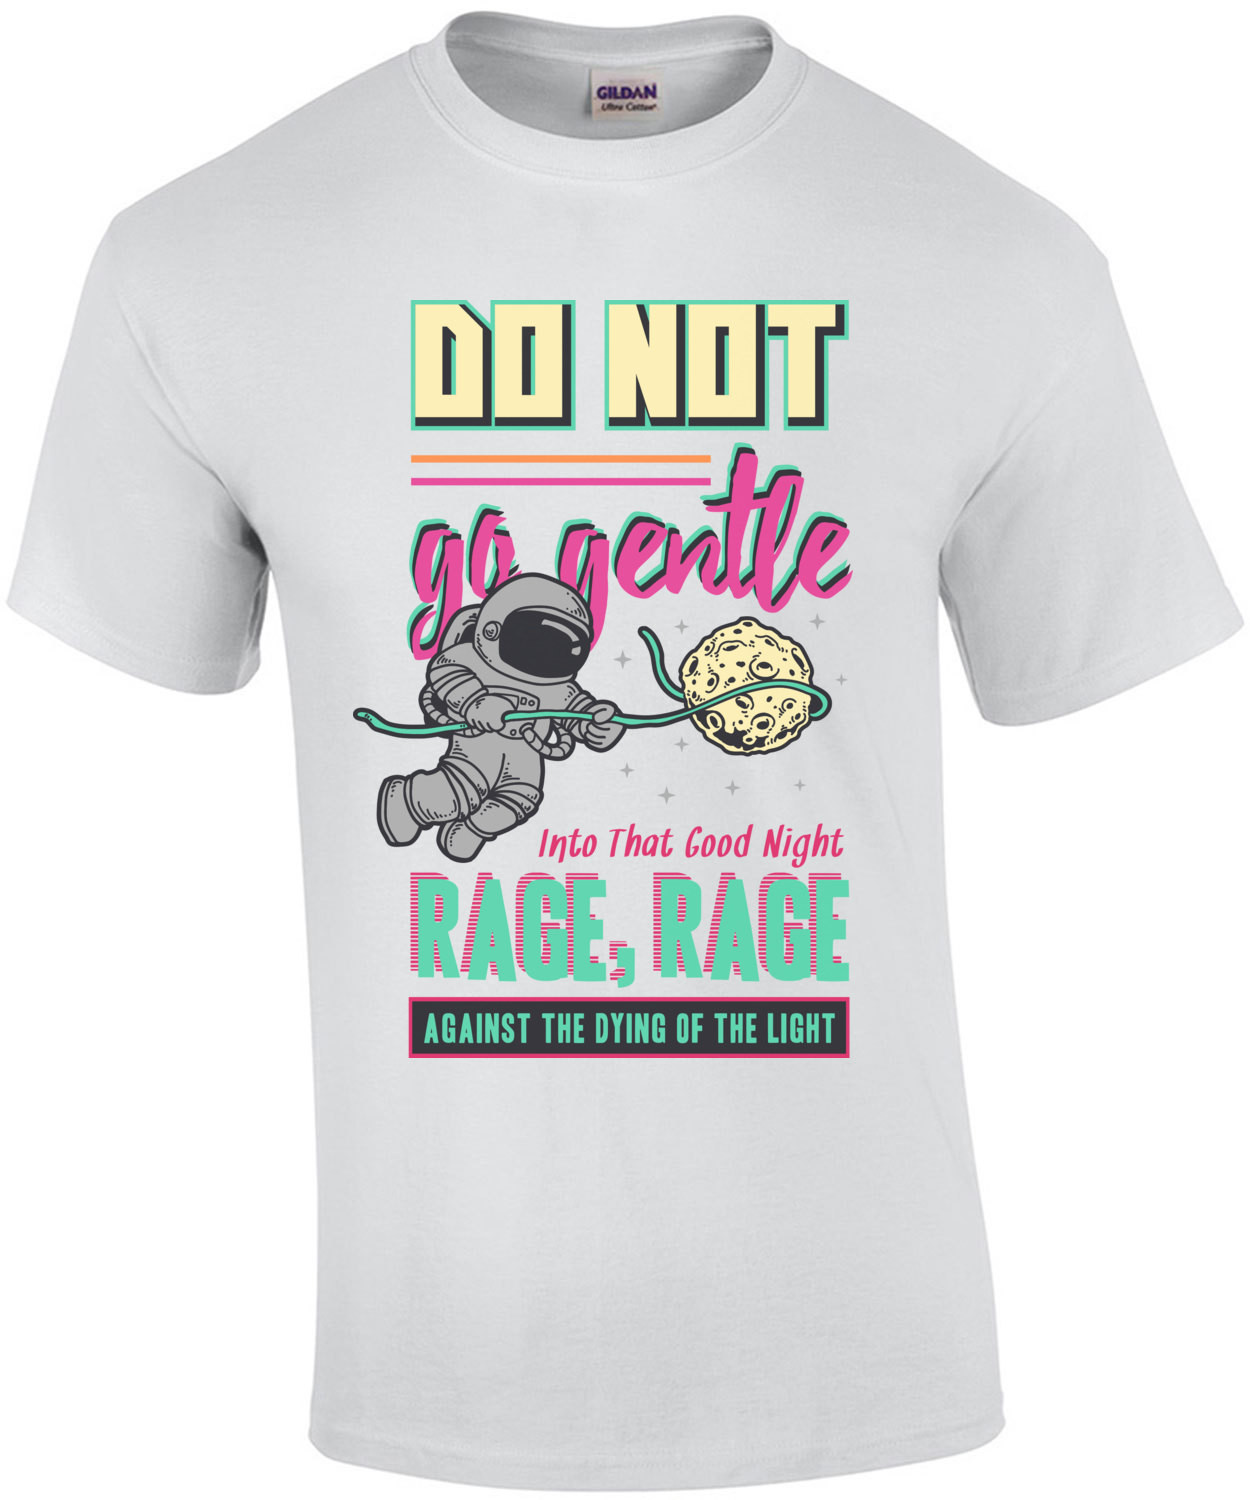 Do Not Go Gentle Into That Good Night Rage Rage Against The Dying Of The Light Motivational T-Shirt